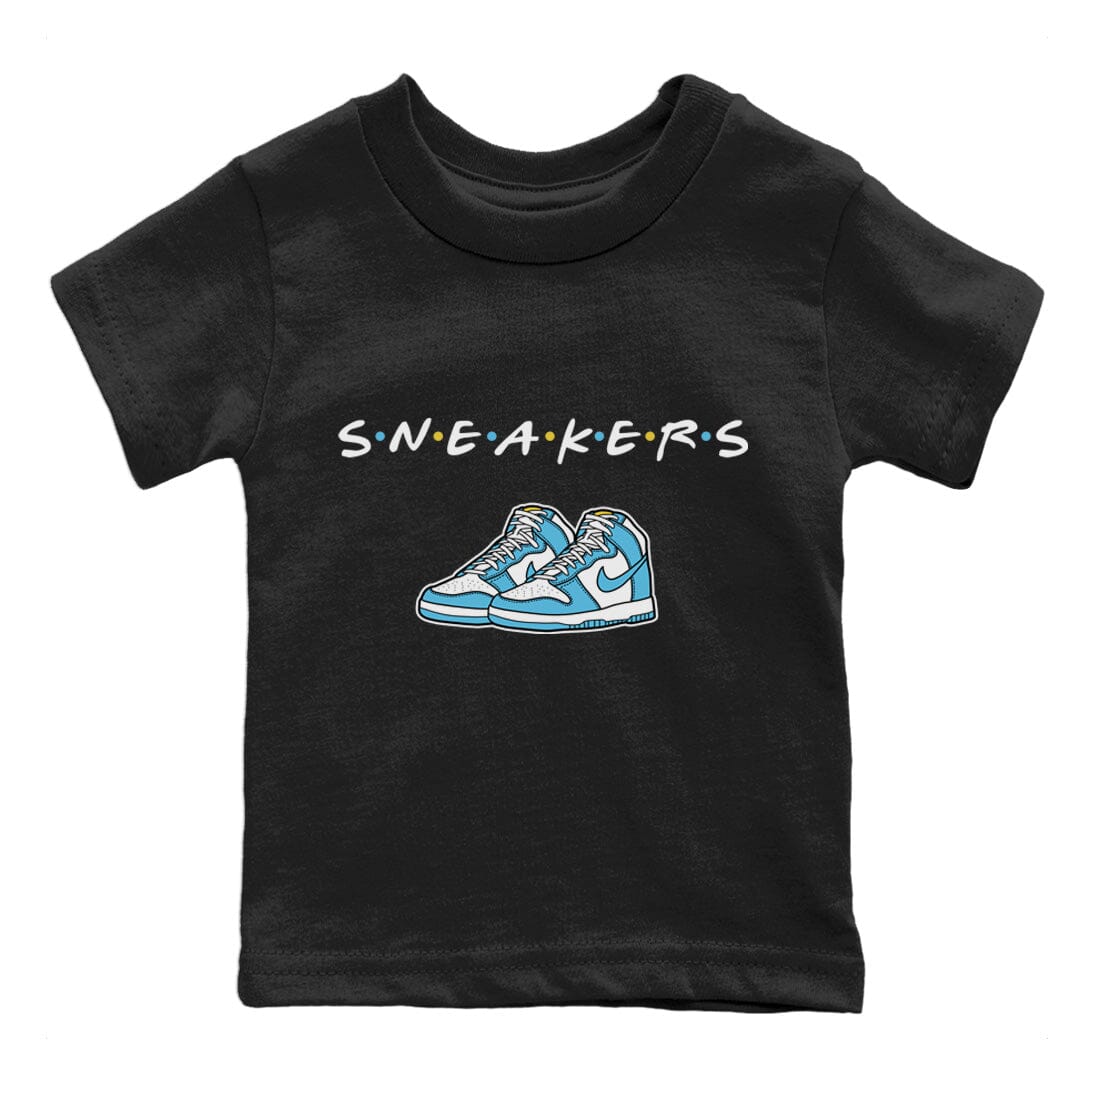 Dunk Blue Chill Sneaker Match Tees Sneakers Sneaker Tees Dunk Blue Chill Sneaker Release Tees Kids Shirts